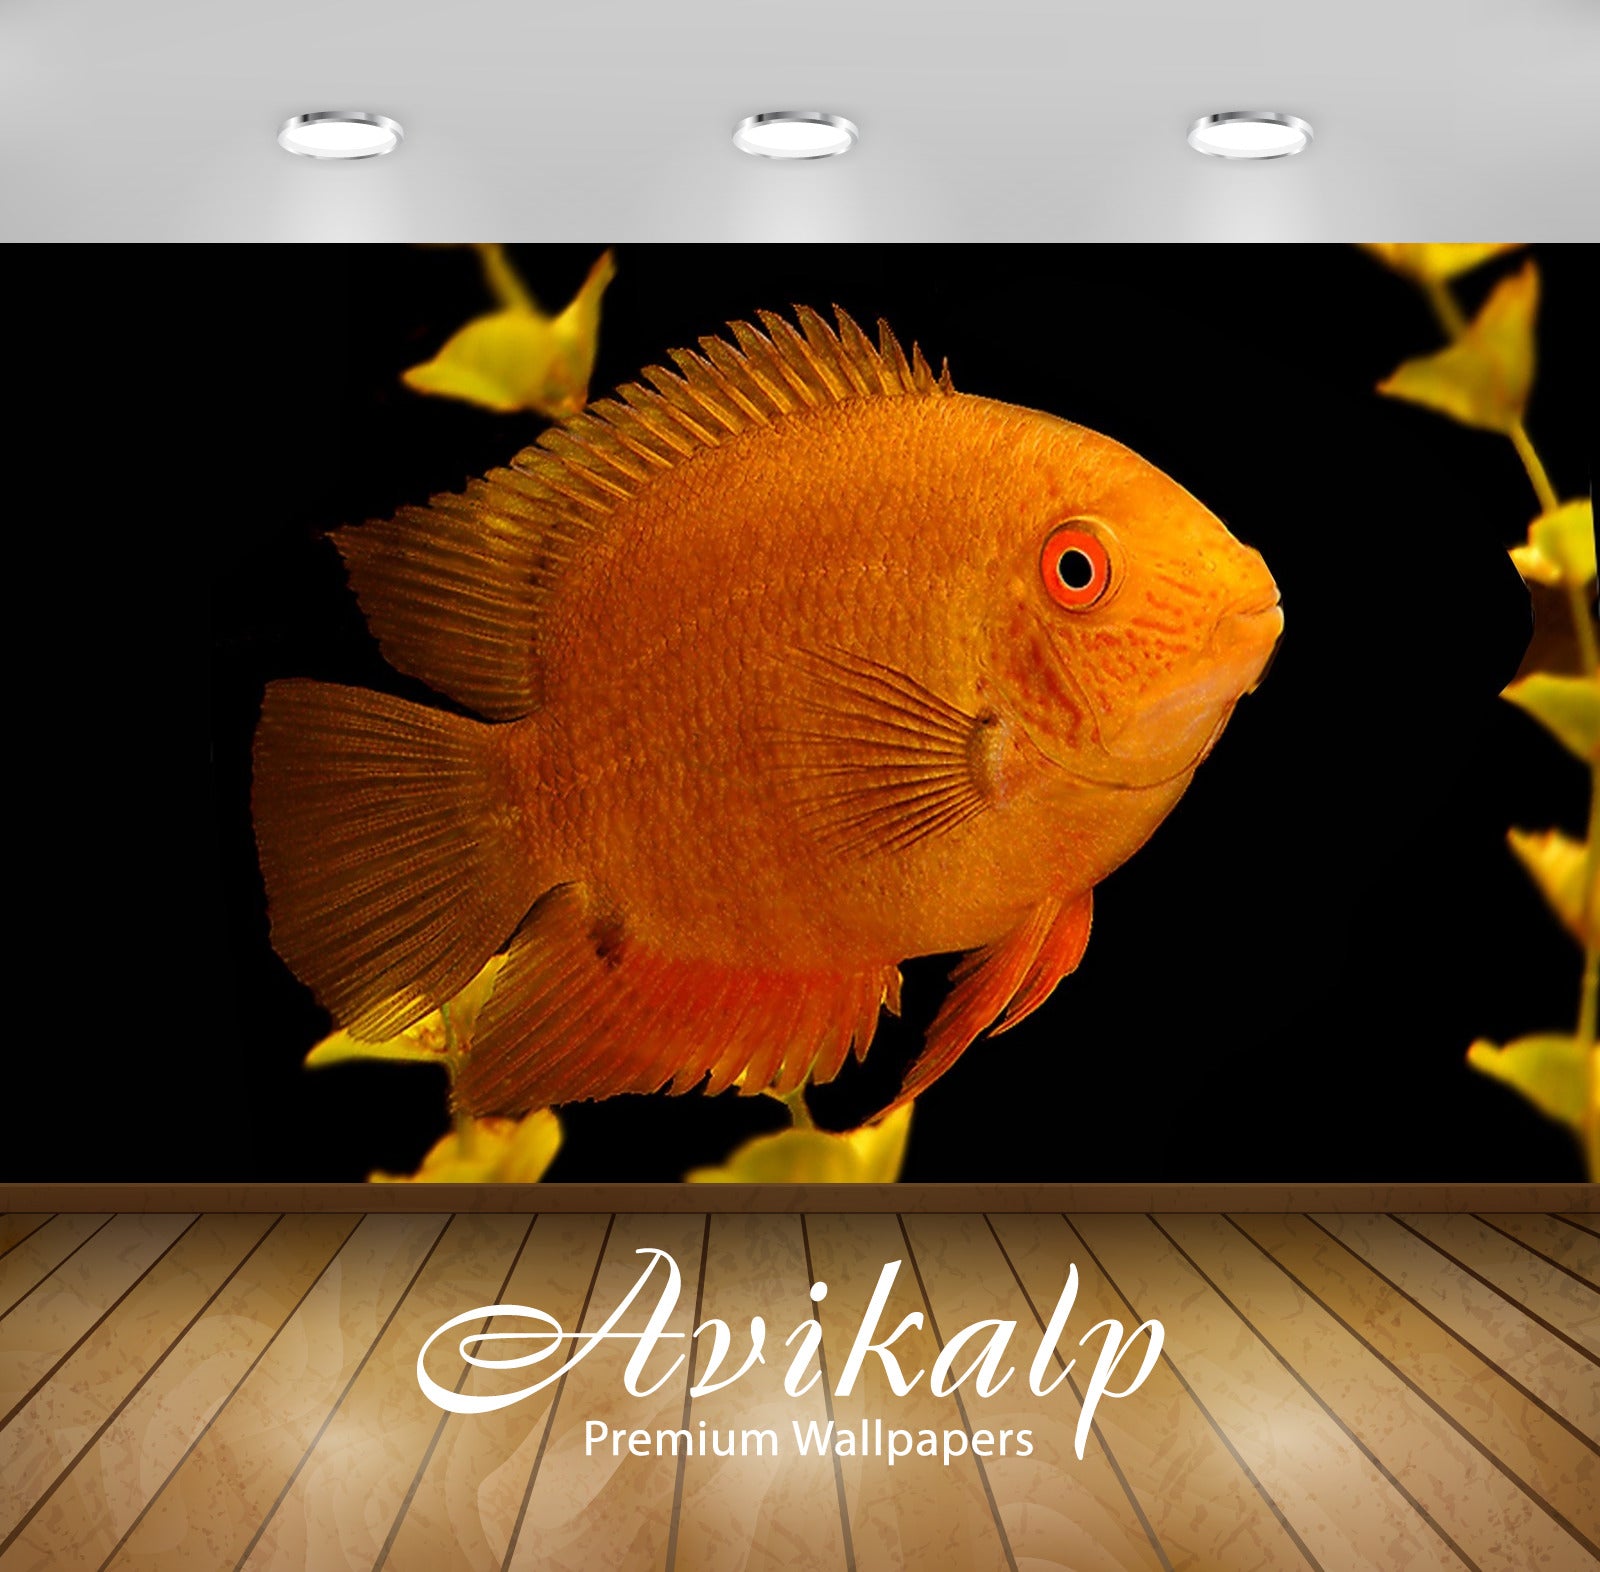 Avikalp Exclusive Awi2674 Gold Severum Fish Full HD Wallpapers for Living room, Hall, Kids Room, Kit